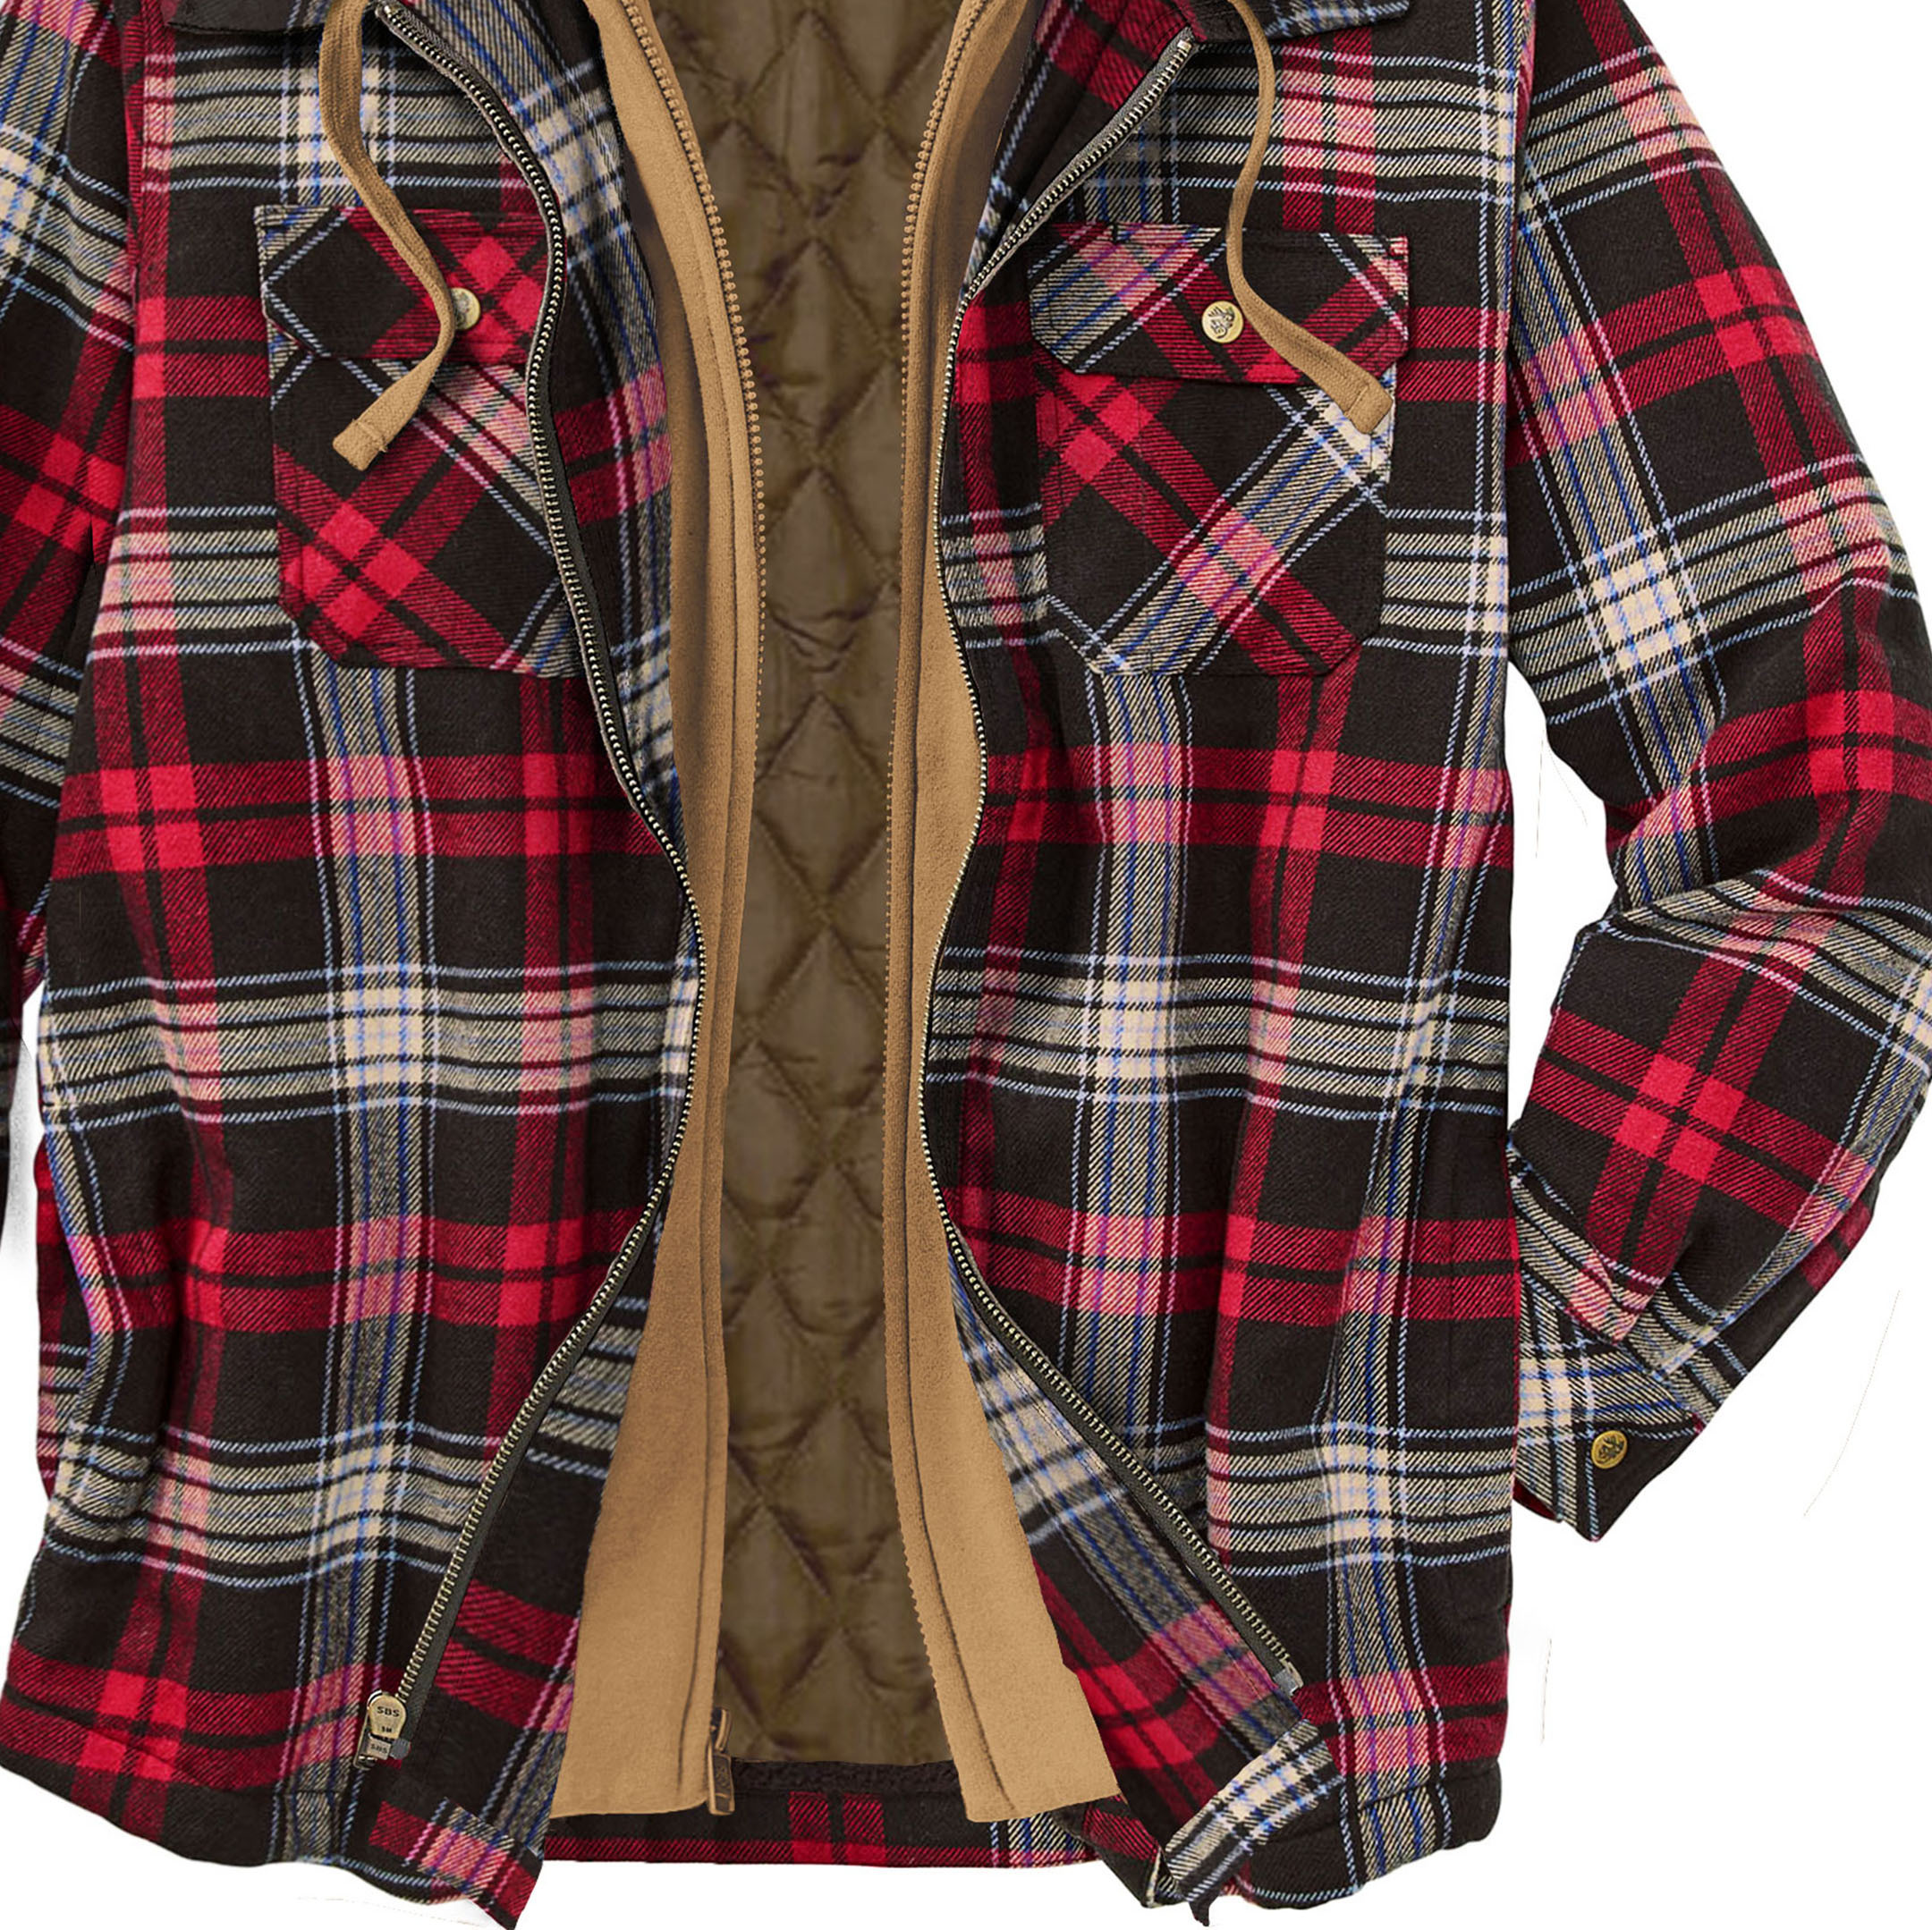 Men's Autumn & Winter Outdoor Casual Checked Hooded Jacket